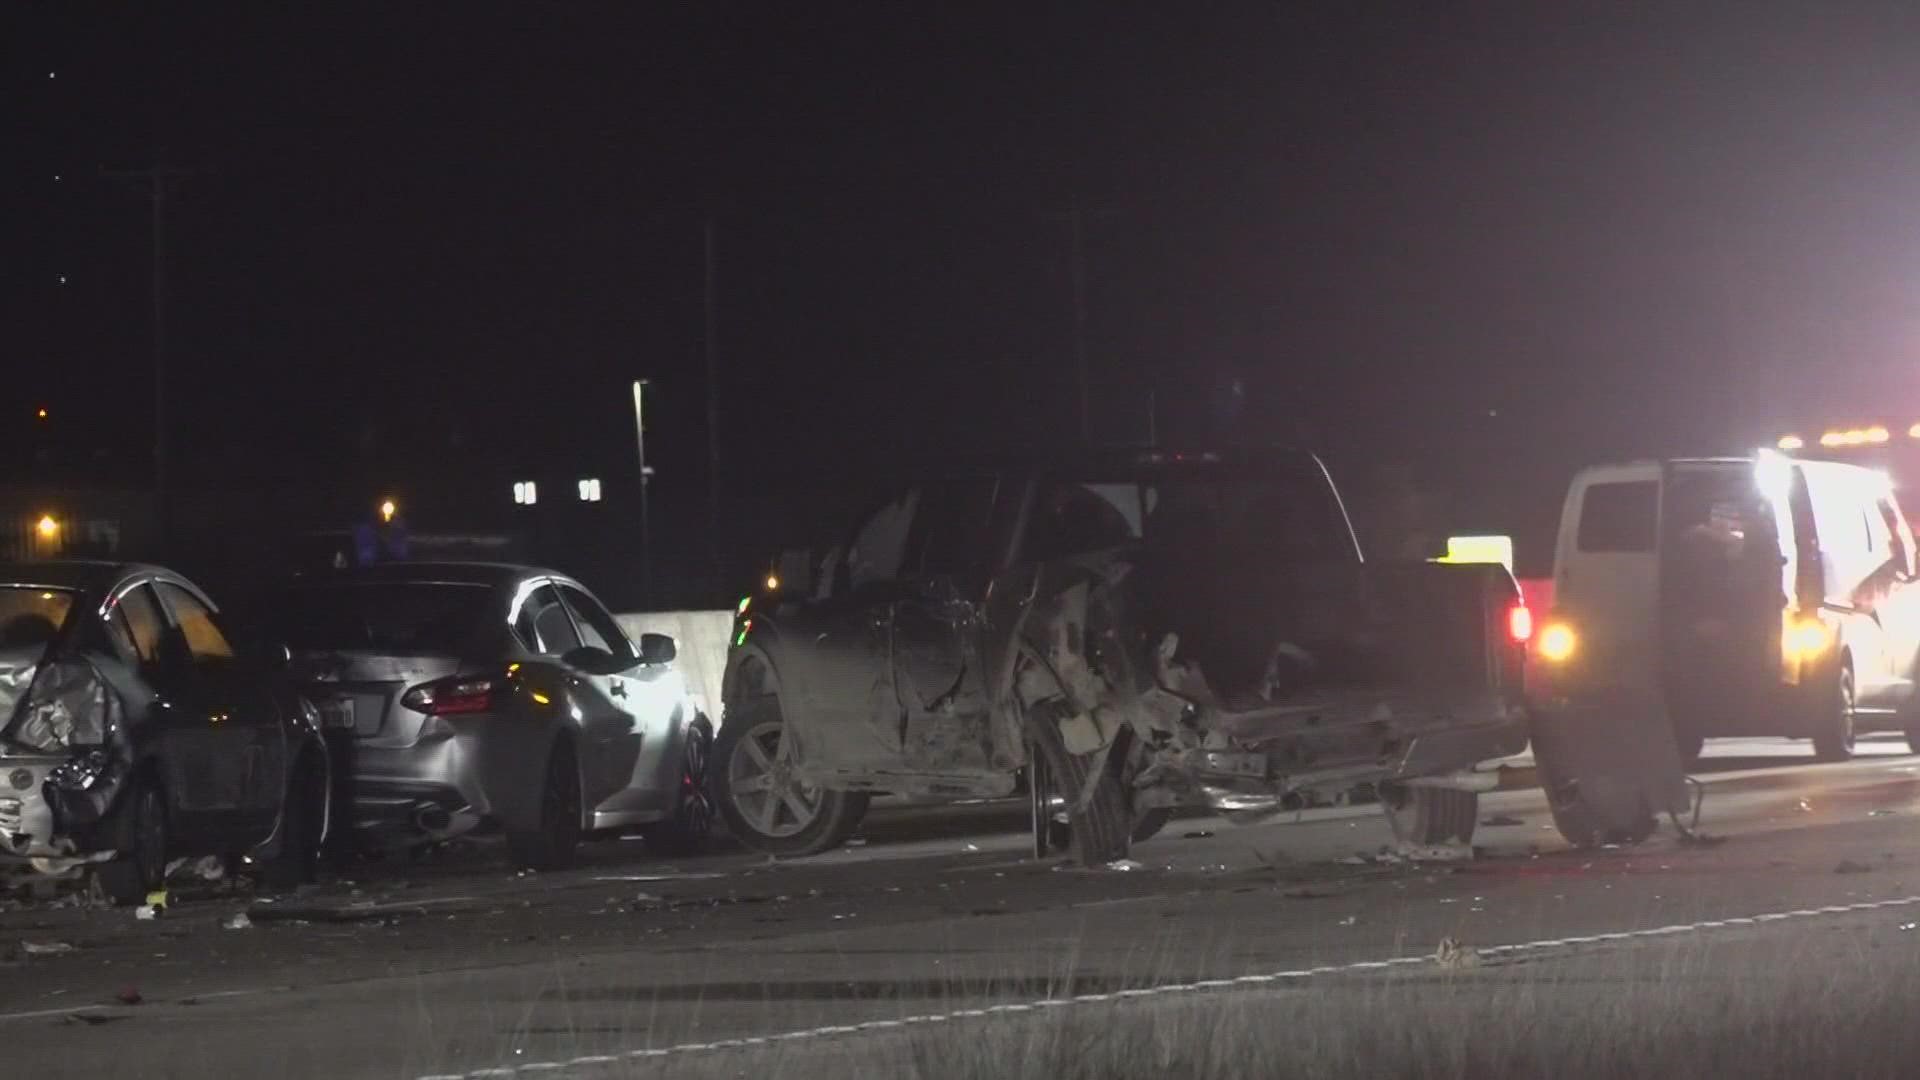 A 13-year-old and an 8-year-old boy from Uvalde, Texas died at the site of the crash, Texas DPS says.